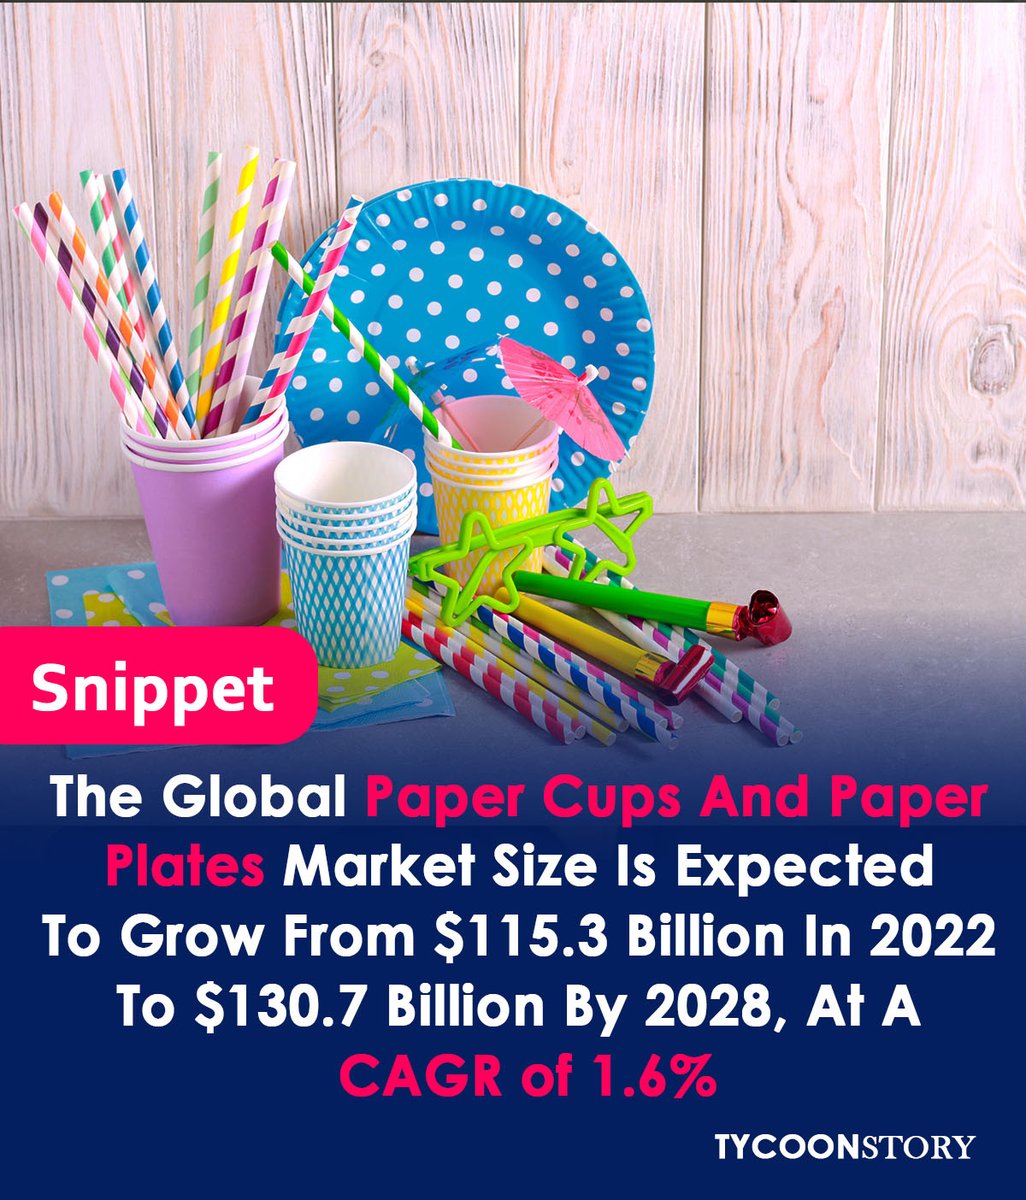 Paper cups and plates market size to reach $130.7B by 2028, from $115.3B in 2022, at 1.6% CAGR
#marketsize #disposablecups #disposableplates #catering #reusablecups #SustainableLiving #ReduceWaste #FoodService #GreenLiving #FoodPackaging #EcoConscious #ReduceReuseRecycle